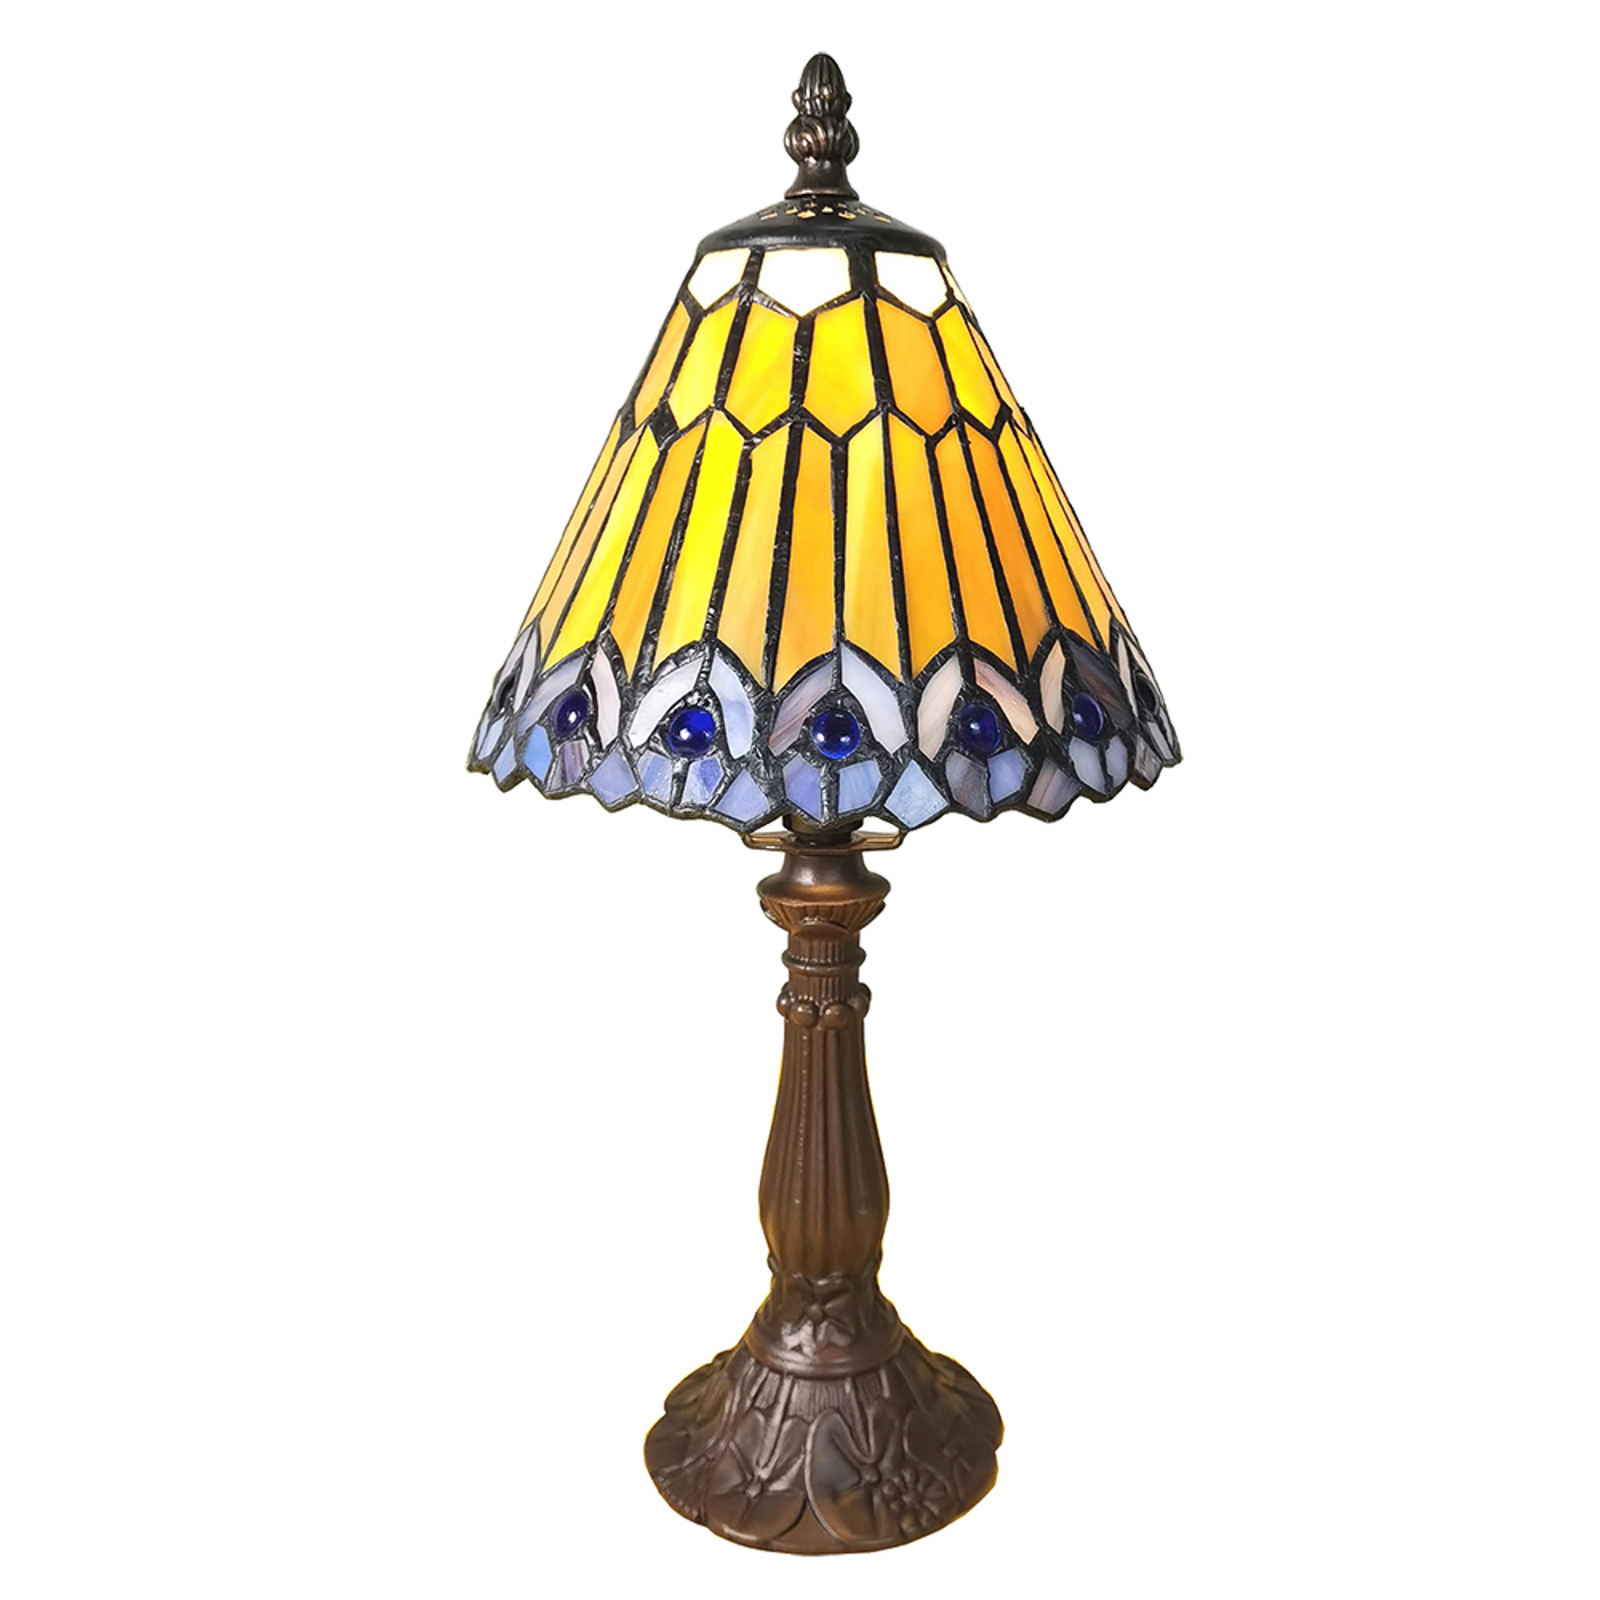 5LL-6110 Tiffany-style table lamp, brown